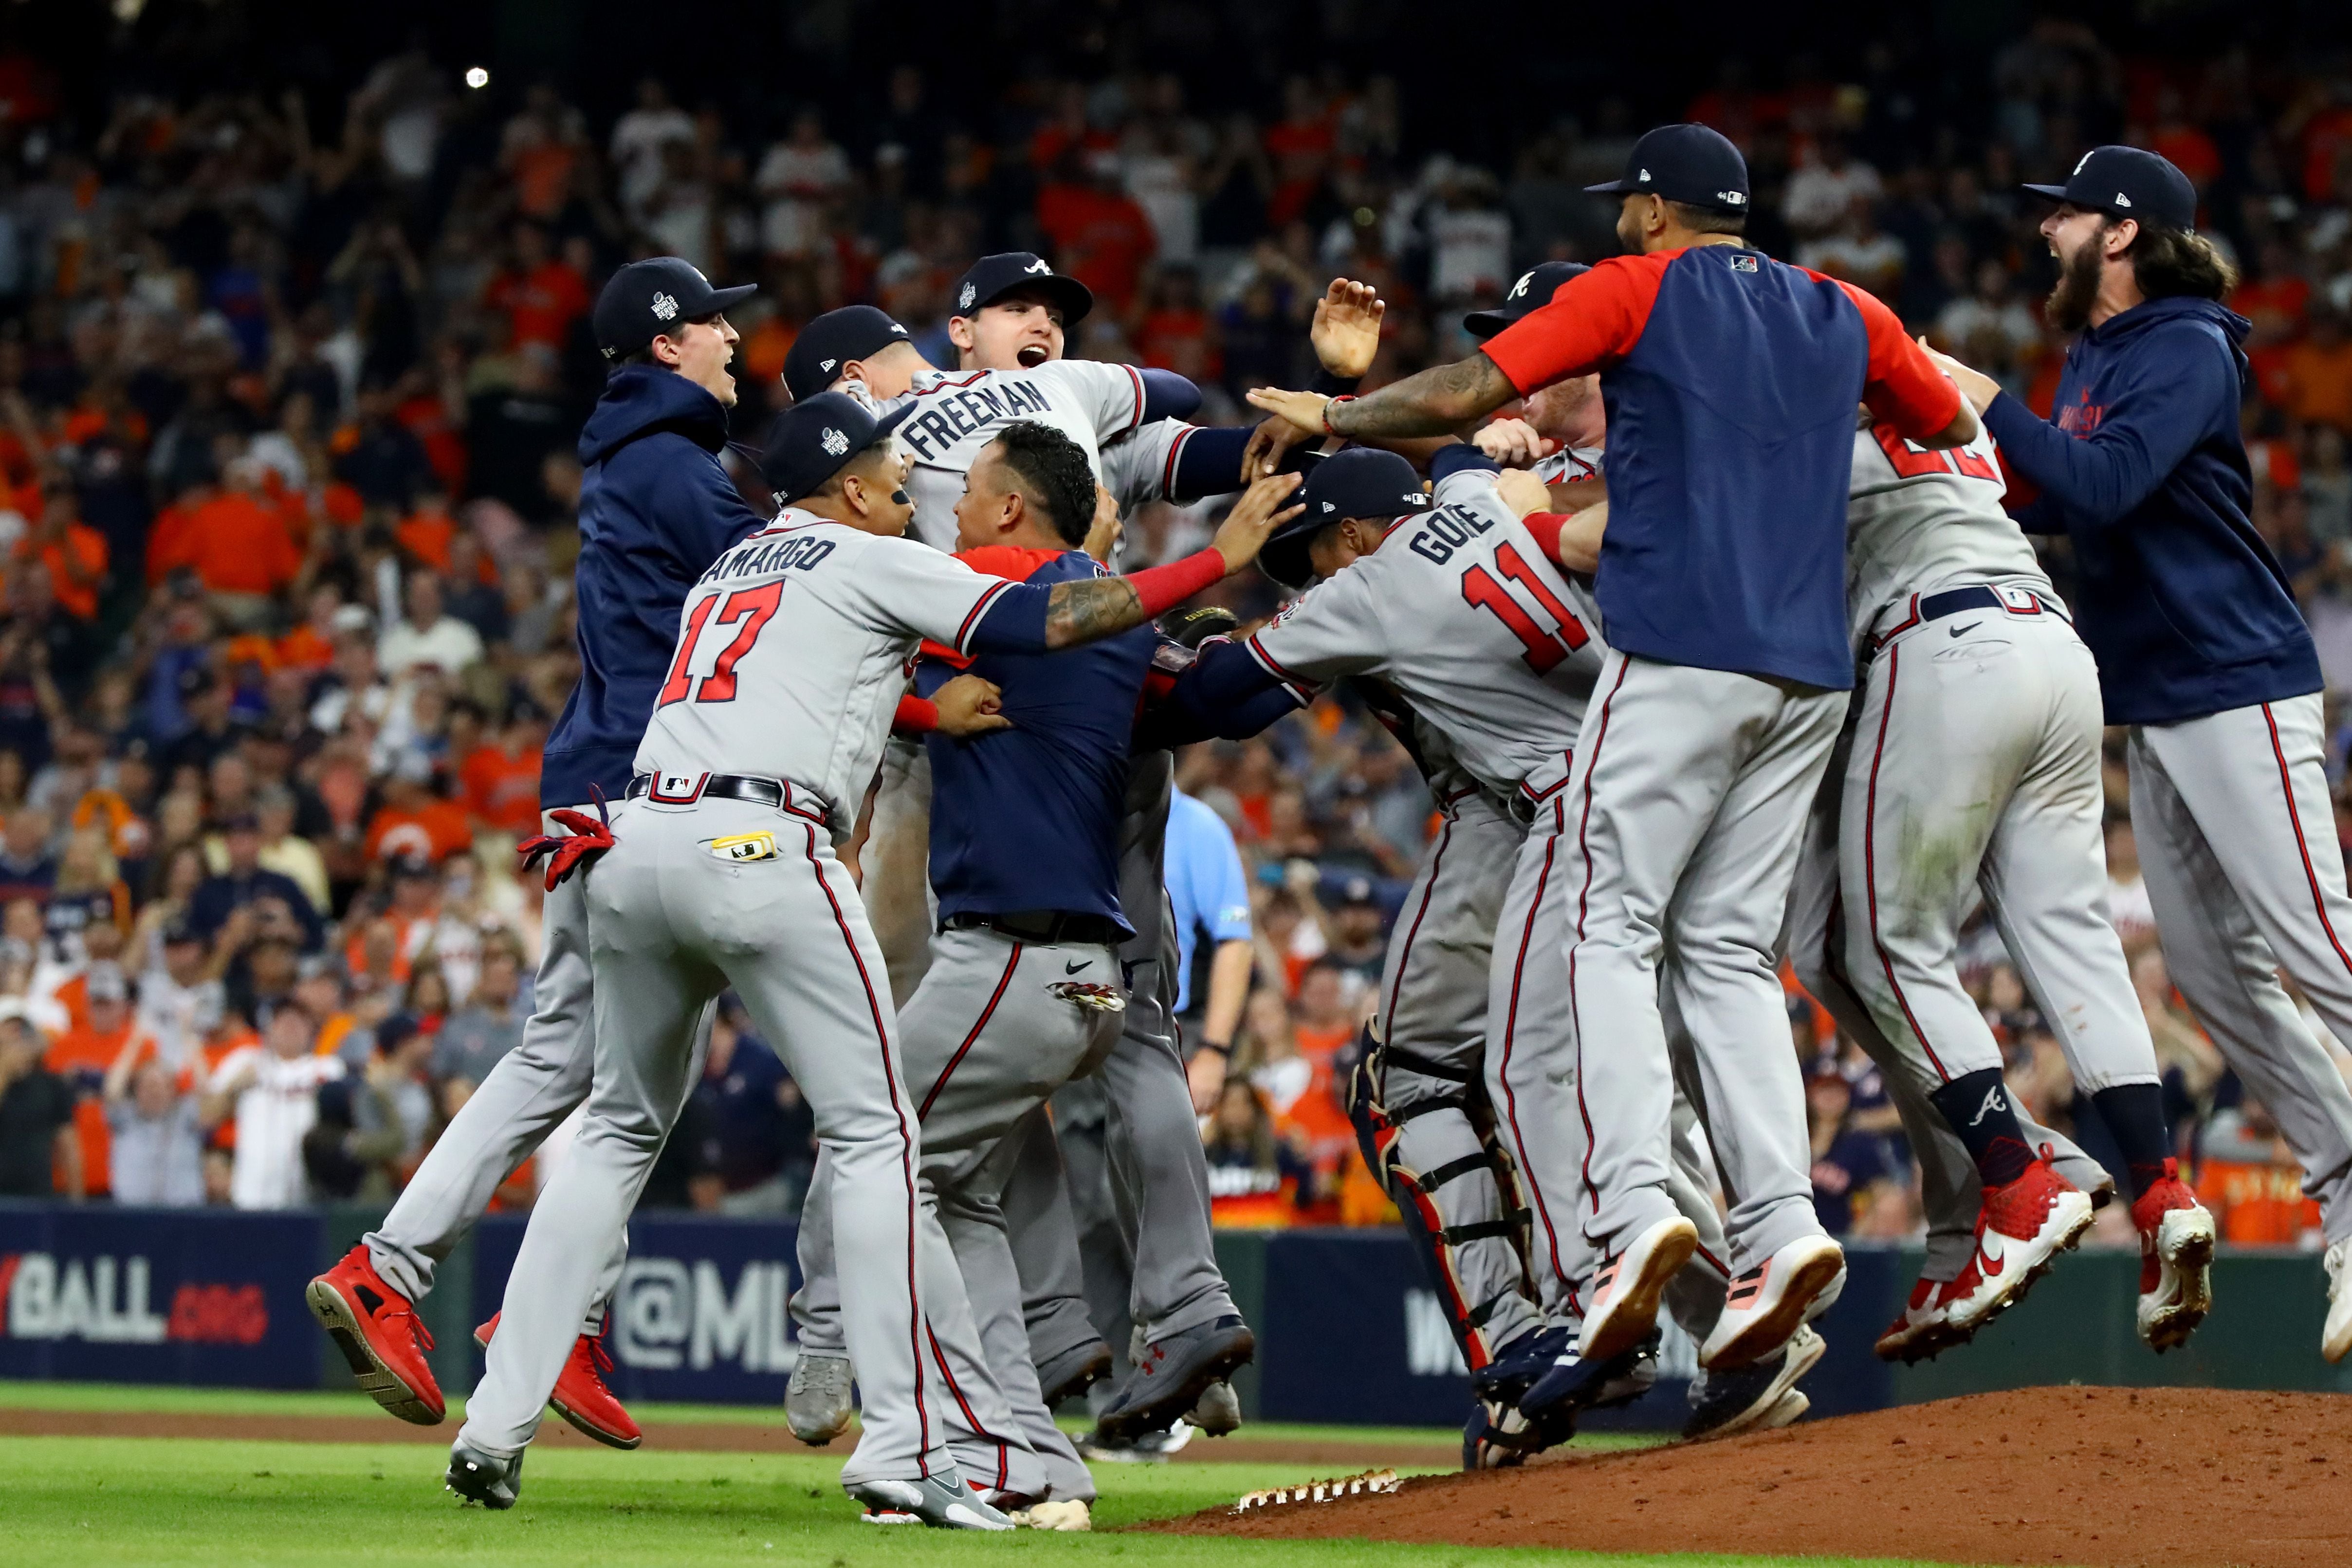 World Series 2021 results: Braves win first championship since